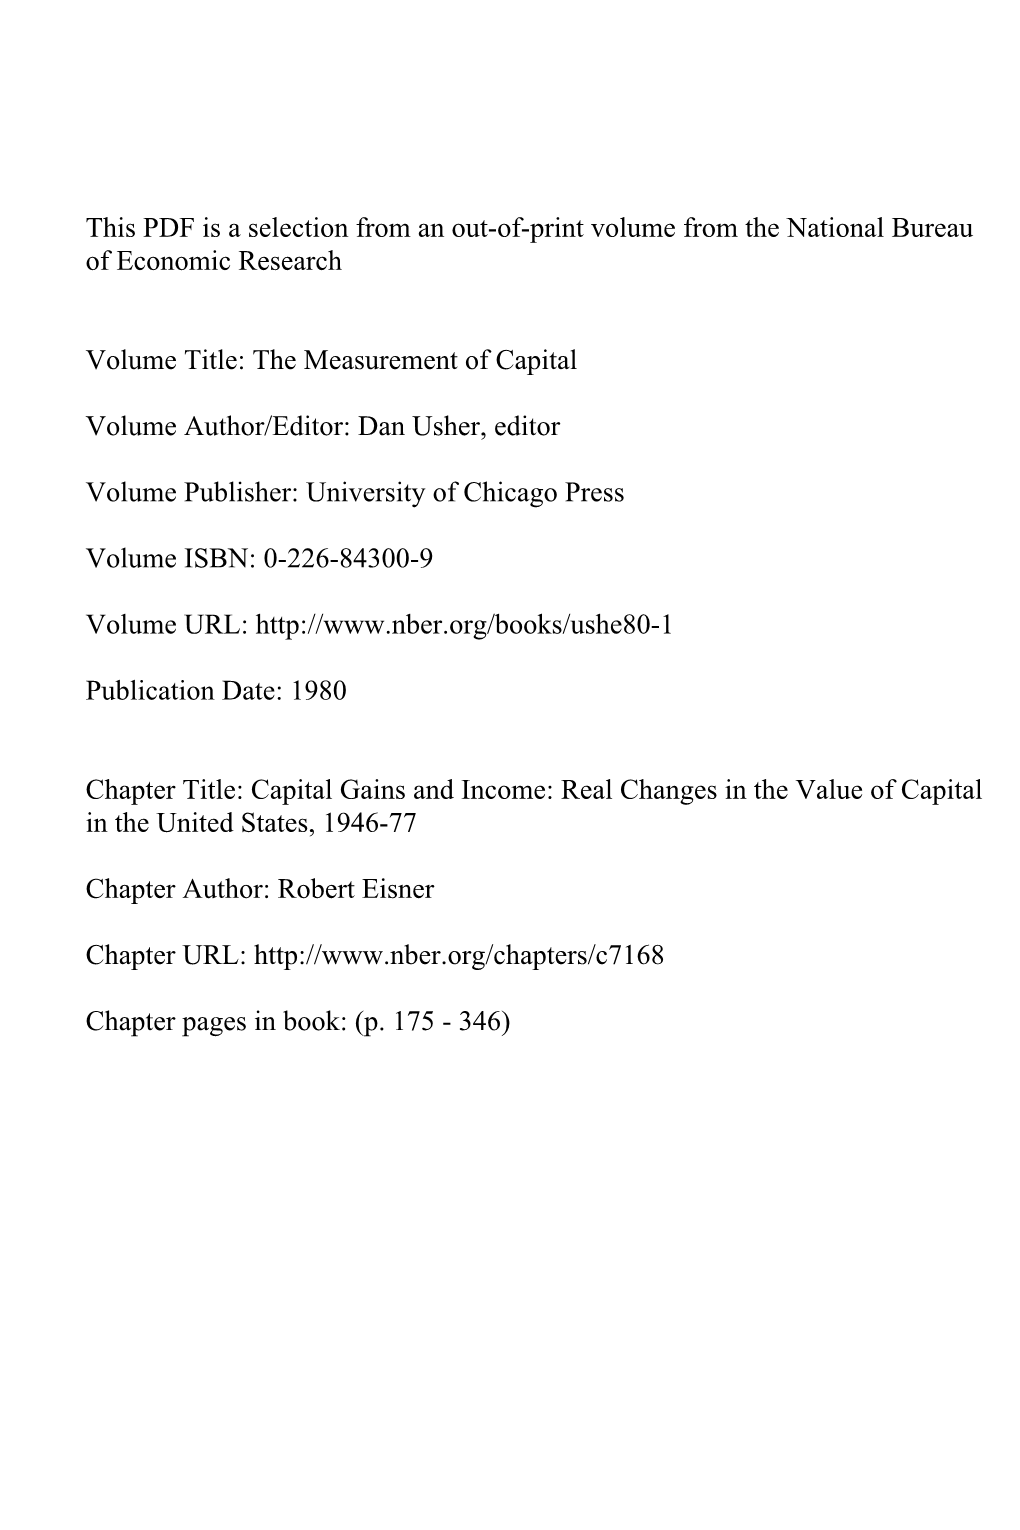 Capital Gains and Income: Real Changes in the Value of Capital in the United States, 1946-77